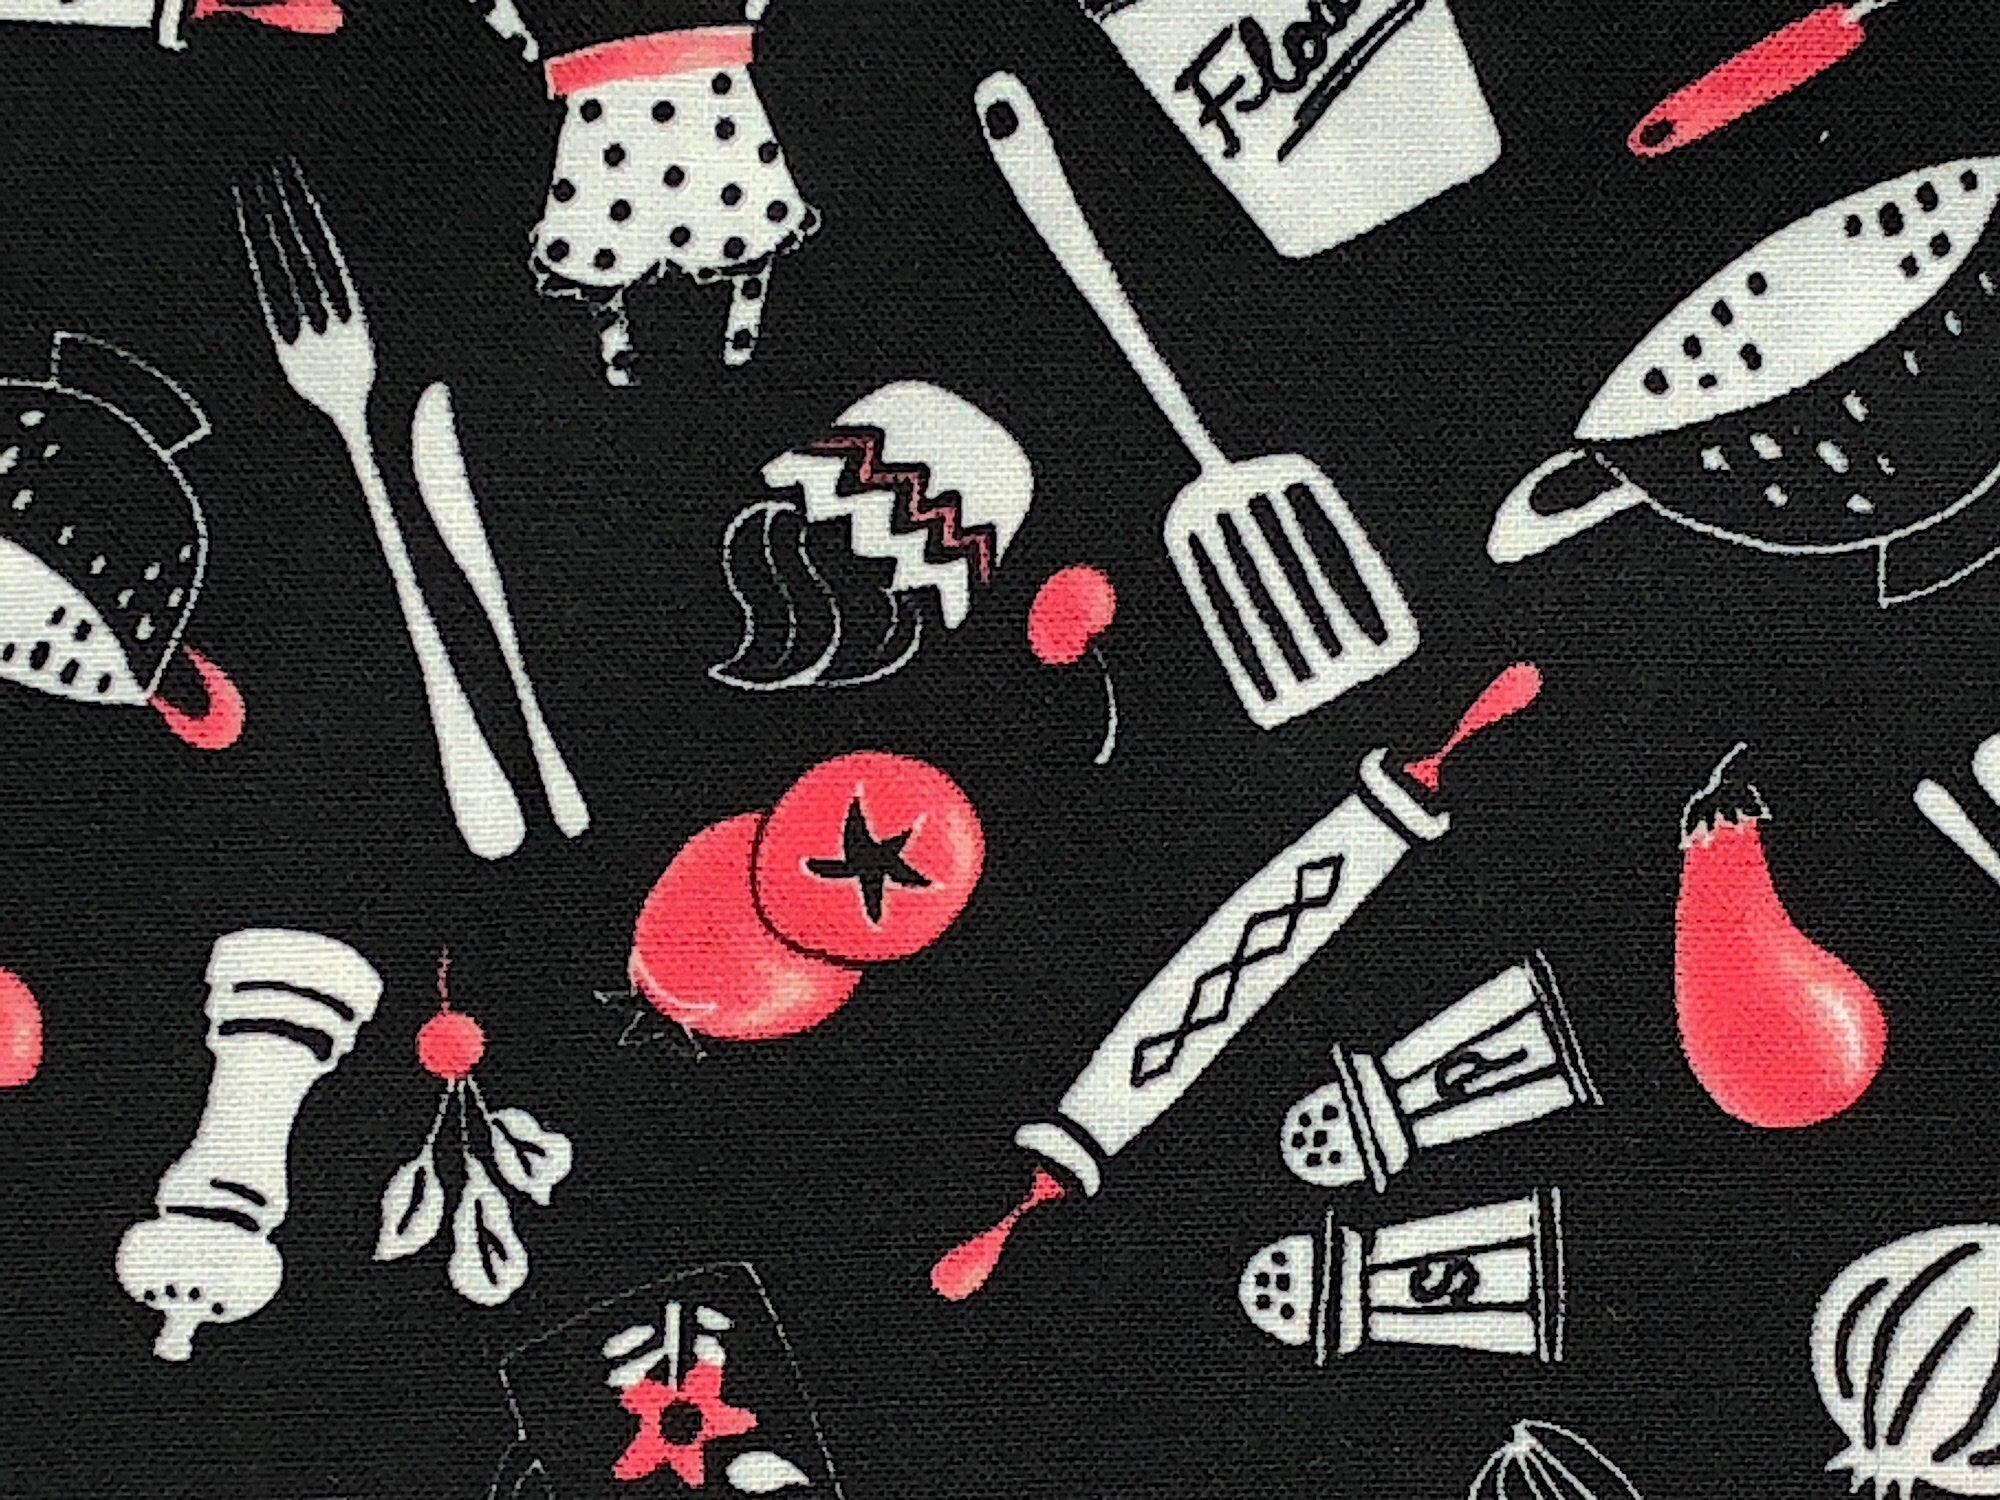 Black cotton fabric covered with tomatoes, chili peppers, colanders and more.